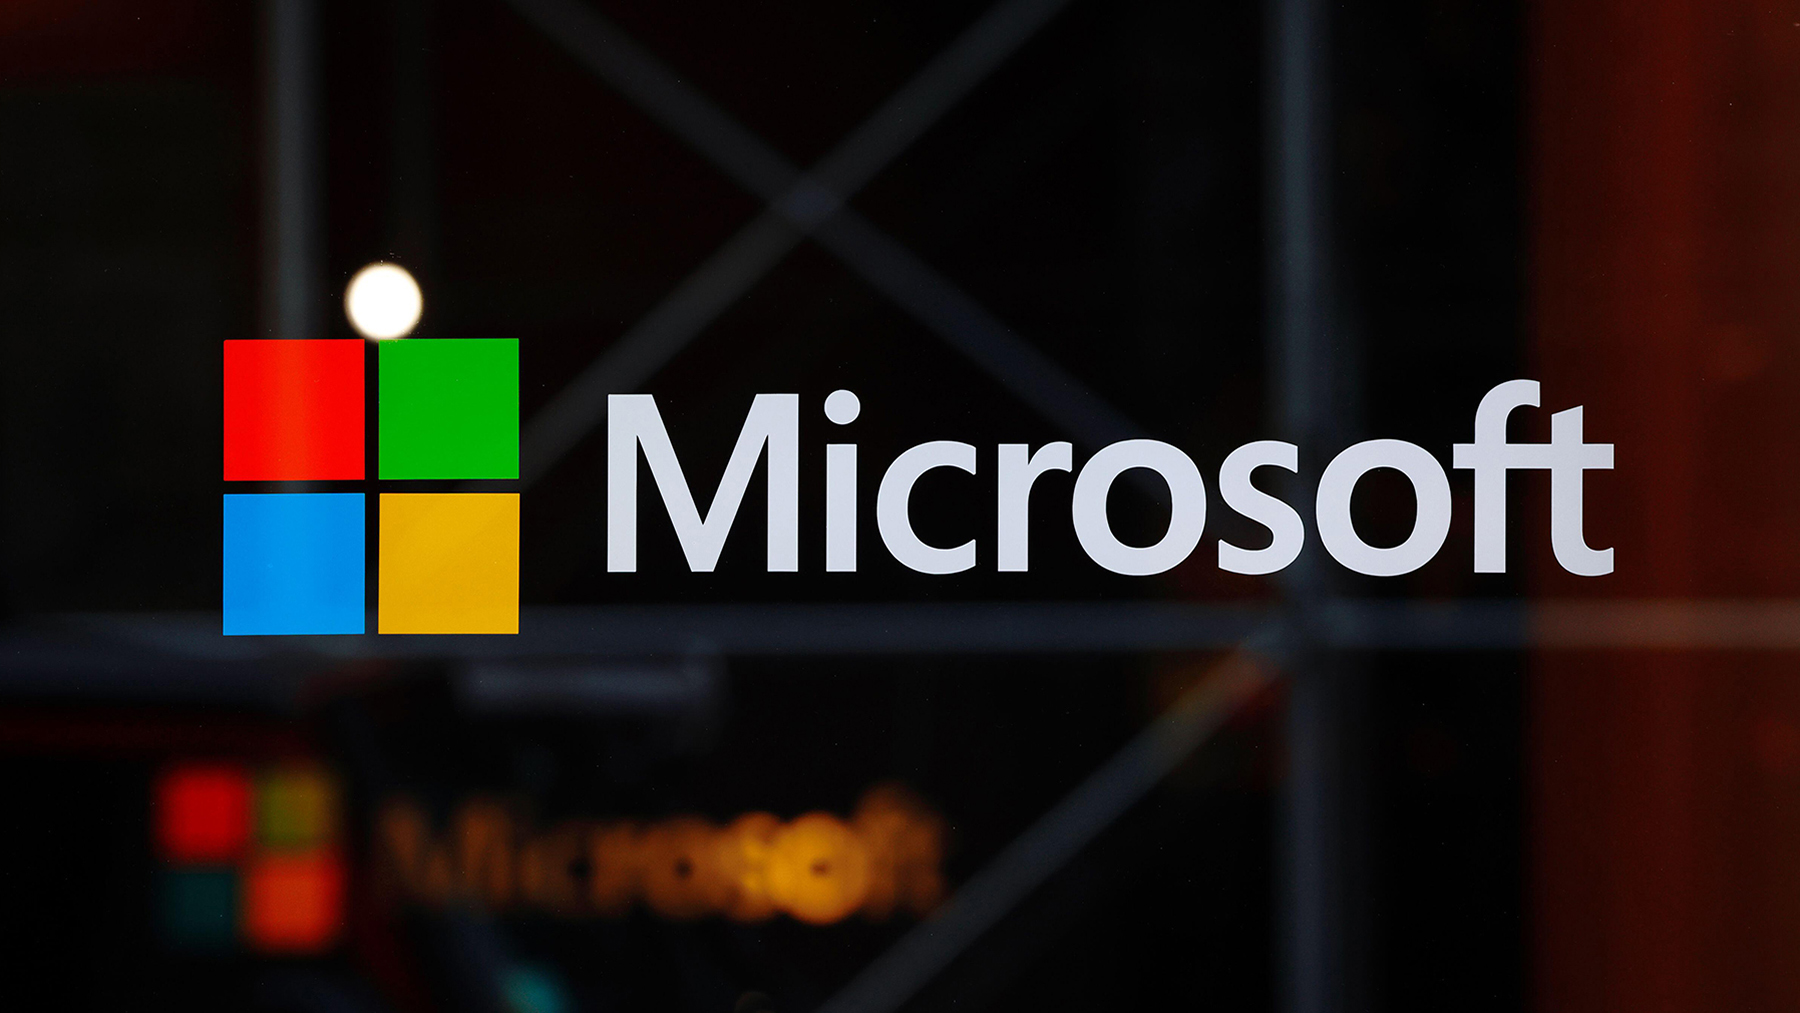 Microsoft Zero Day Used by Lazarus in Rootkit Attack